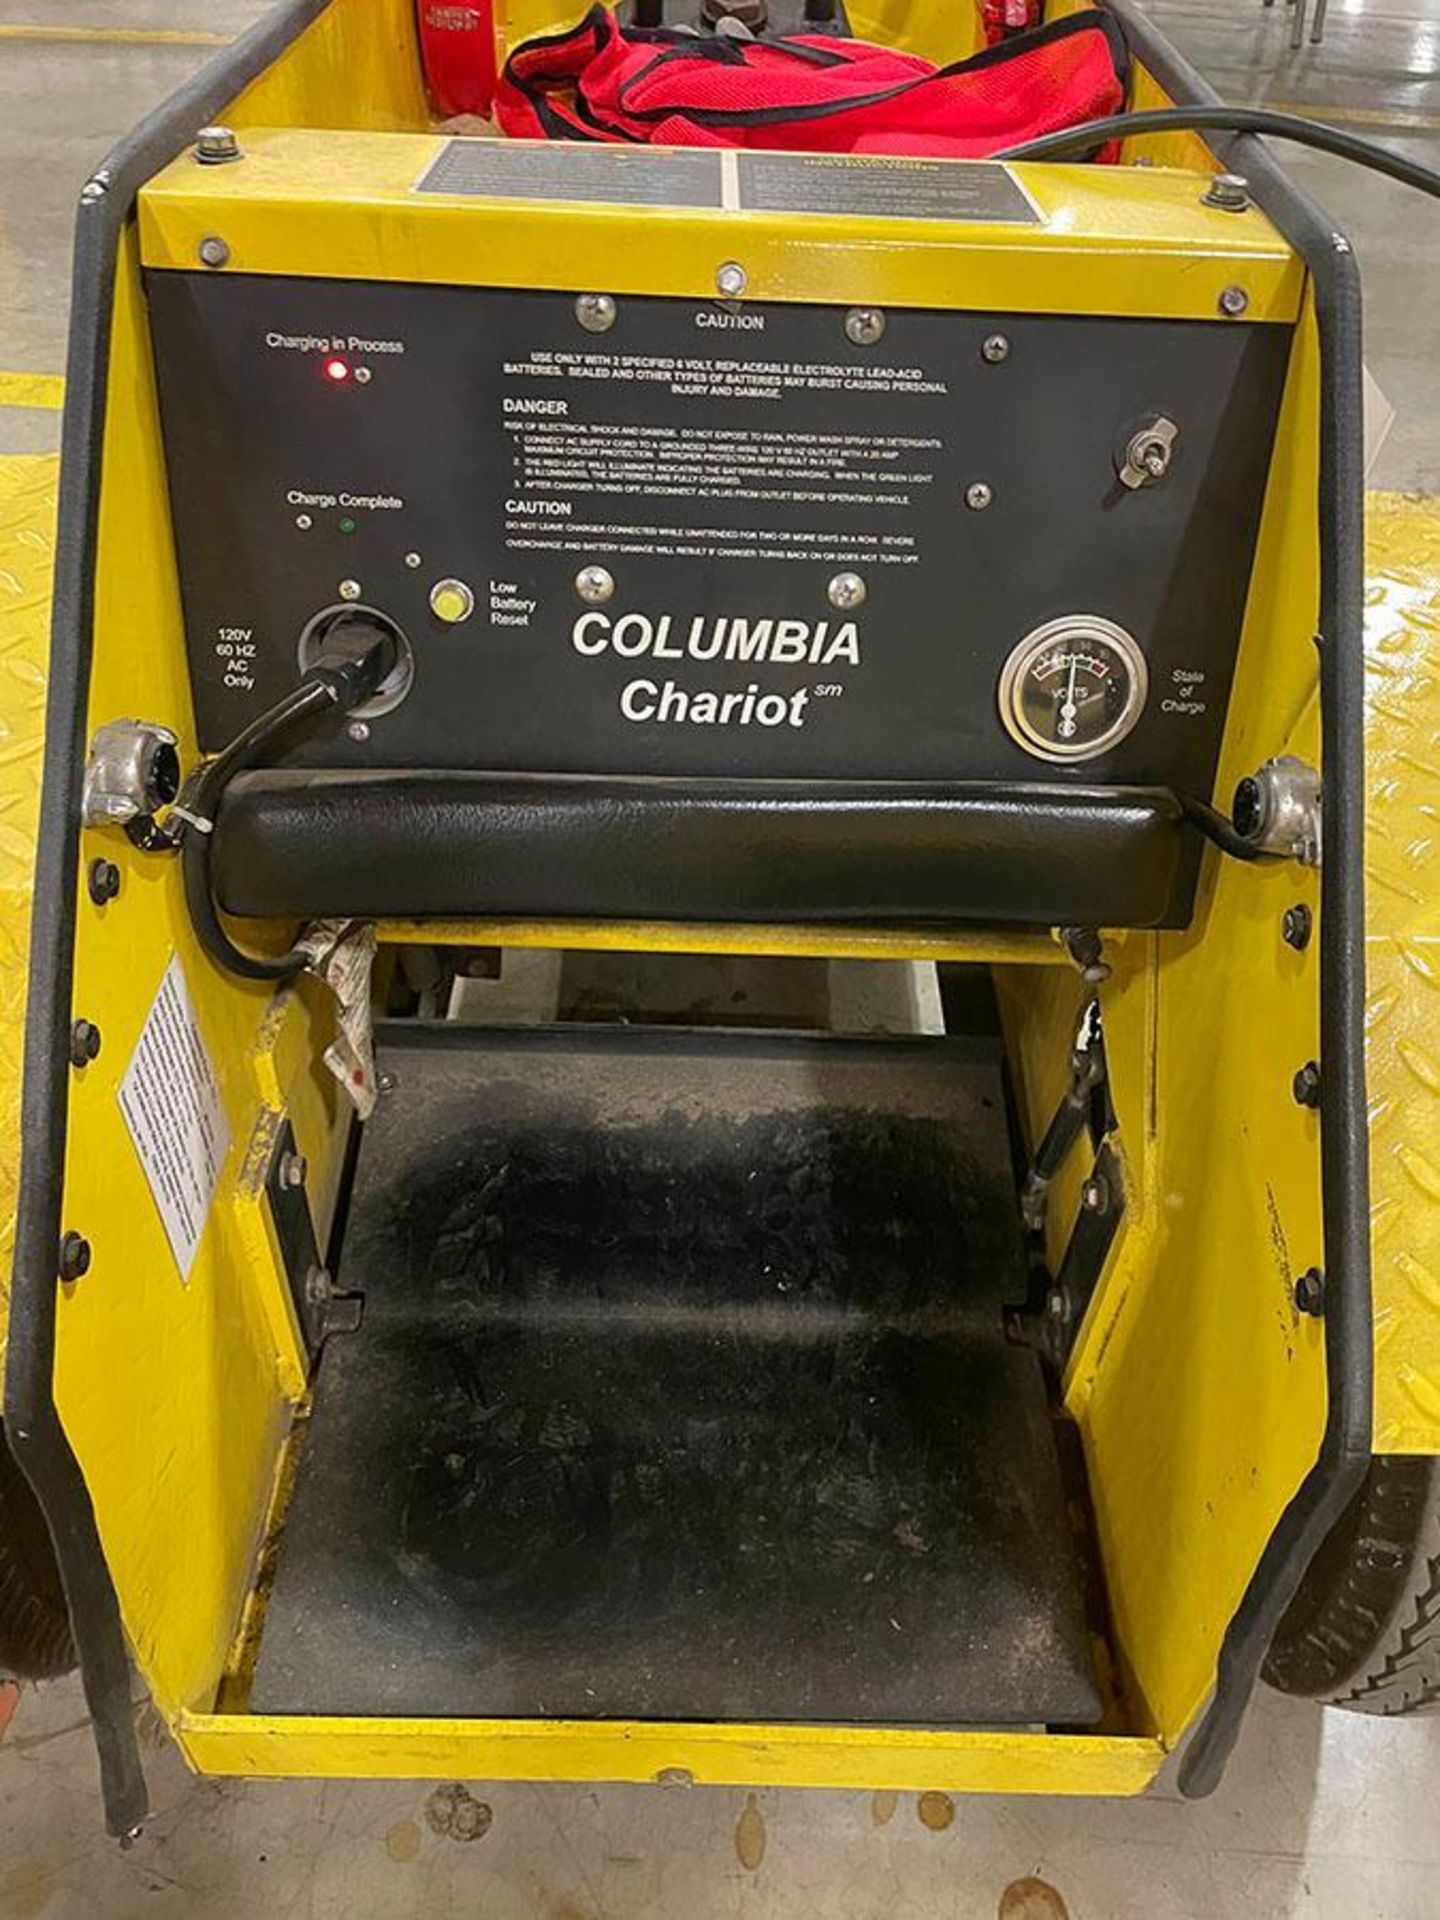 COLUMBIA CHARIOT PERSONNEL CARRIER, 12 V., 350 LB. CAP., S/N 4R-11319 - Image 2 of 2